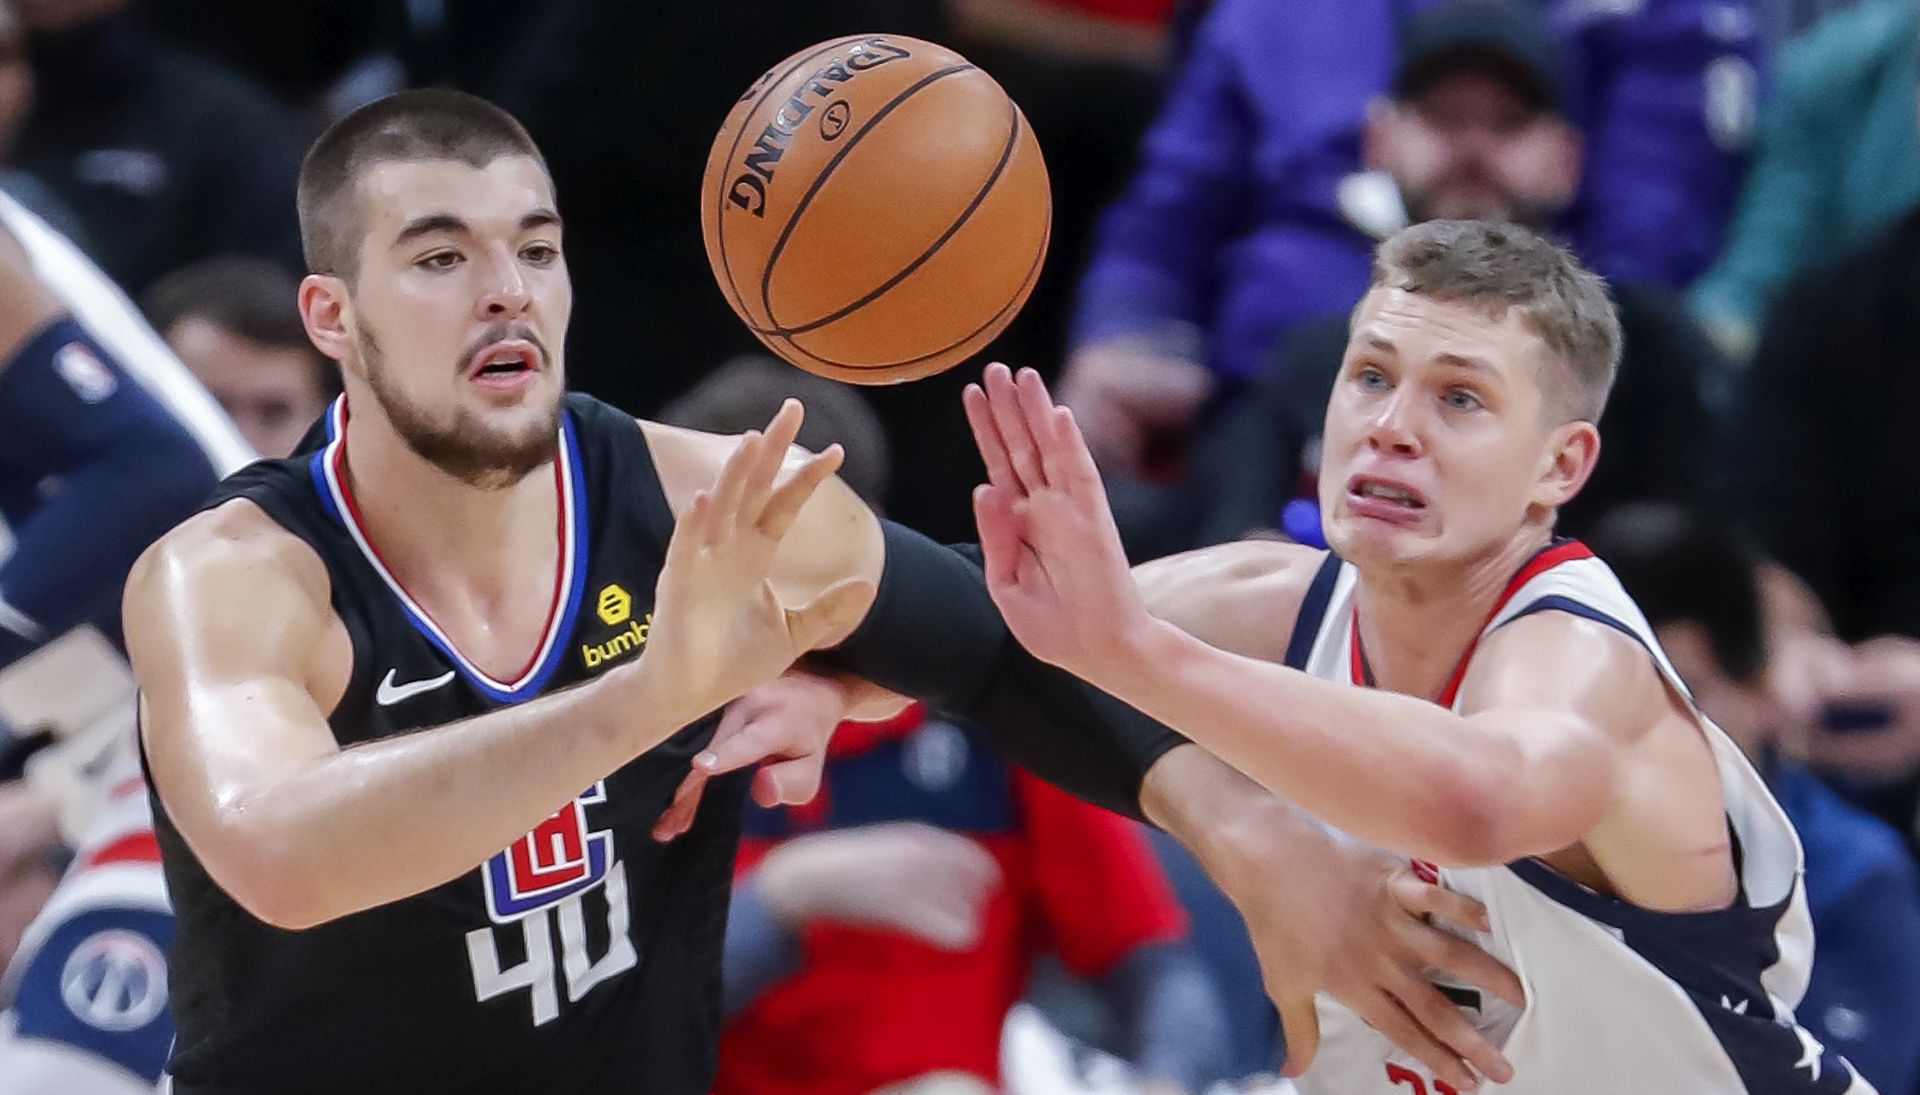 epa08056053 Los Angeles Clippers center Ivica Zubac (L) of Croatia in action against Washington Wizards forward Moritz Wagner (R) of Germany during the first half of the NBA basketball game between the Los Angeles Clippers and the Washington Wizards at CapitalOne Arena in Washington, DC, USA, 08 December 2019.  EPA/ERIK S. LESSER SHUTTERSTOCK OUT